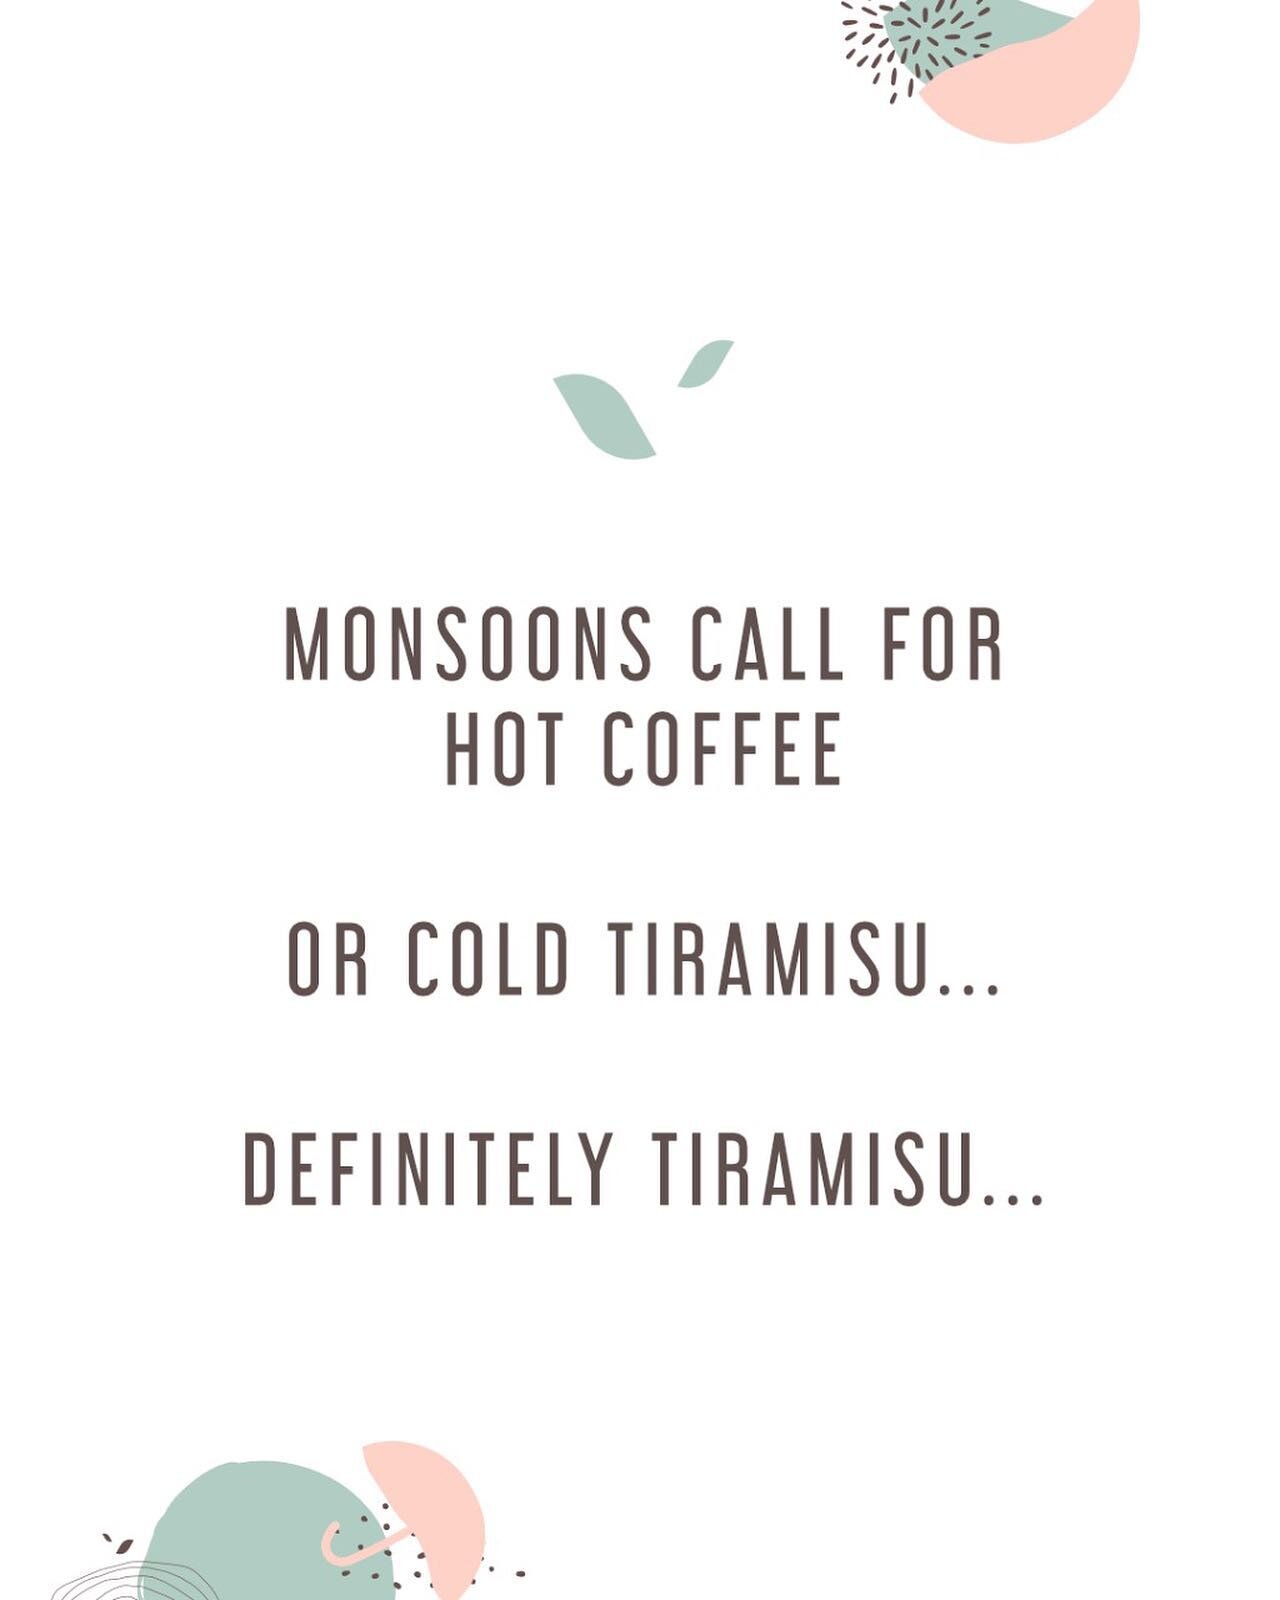 Why have hot coffee when you can have a cold Tiramisu?